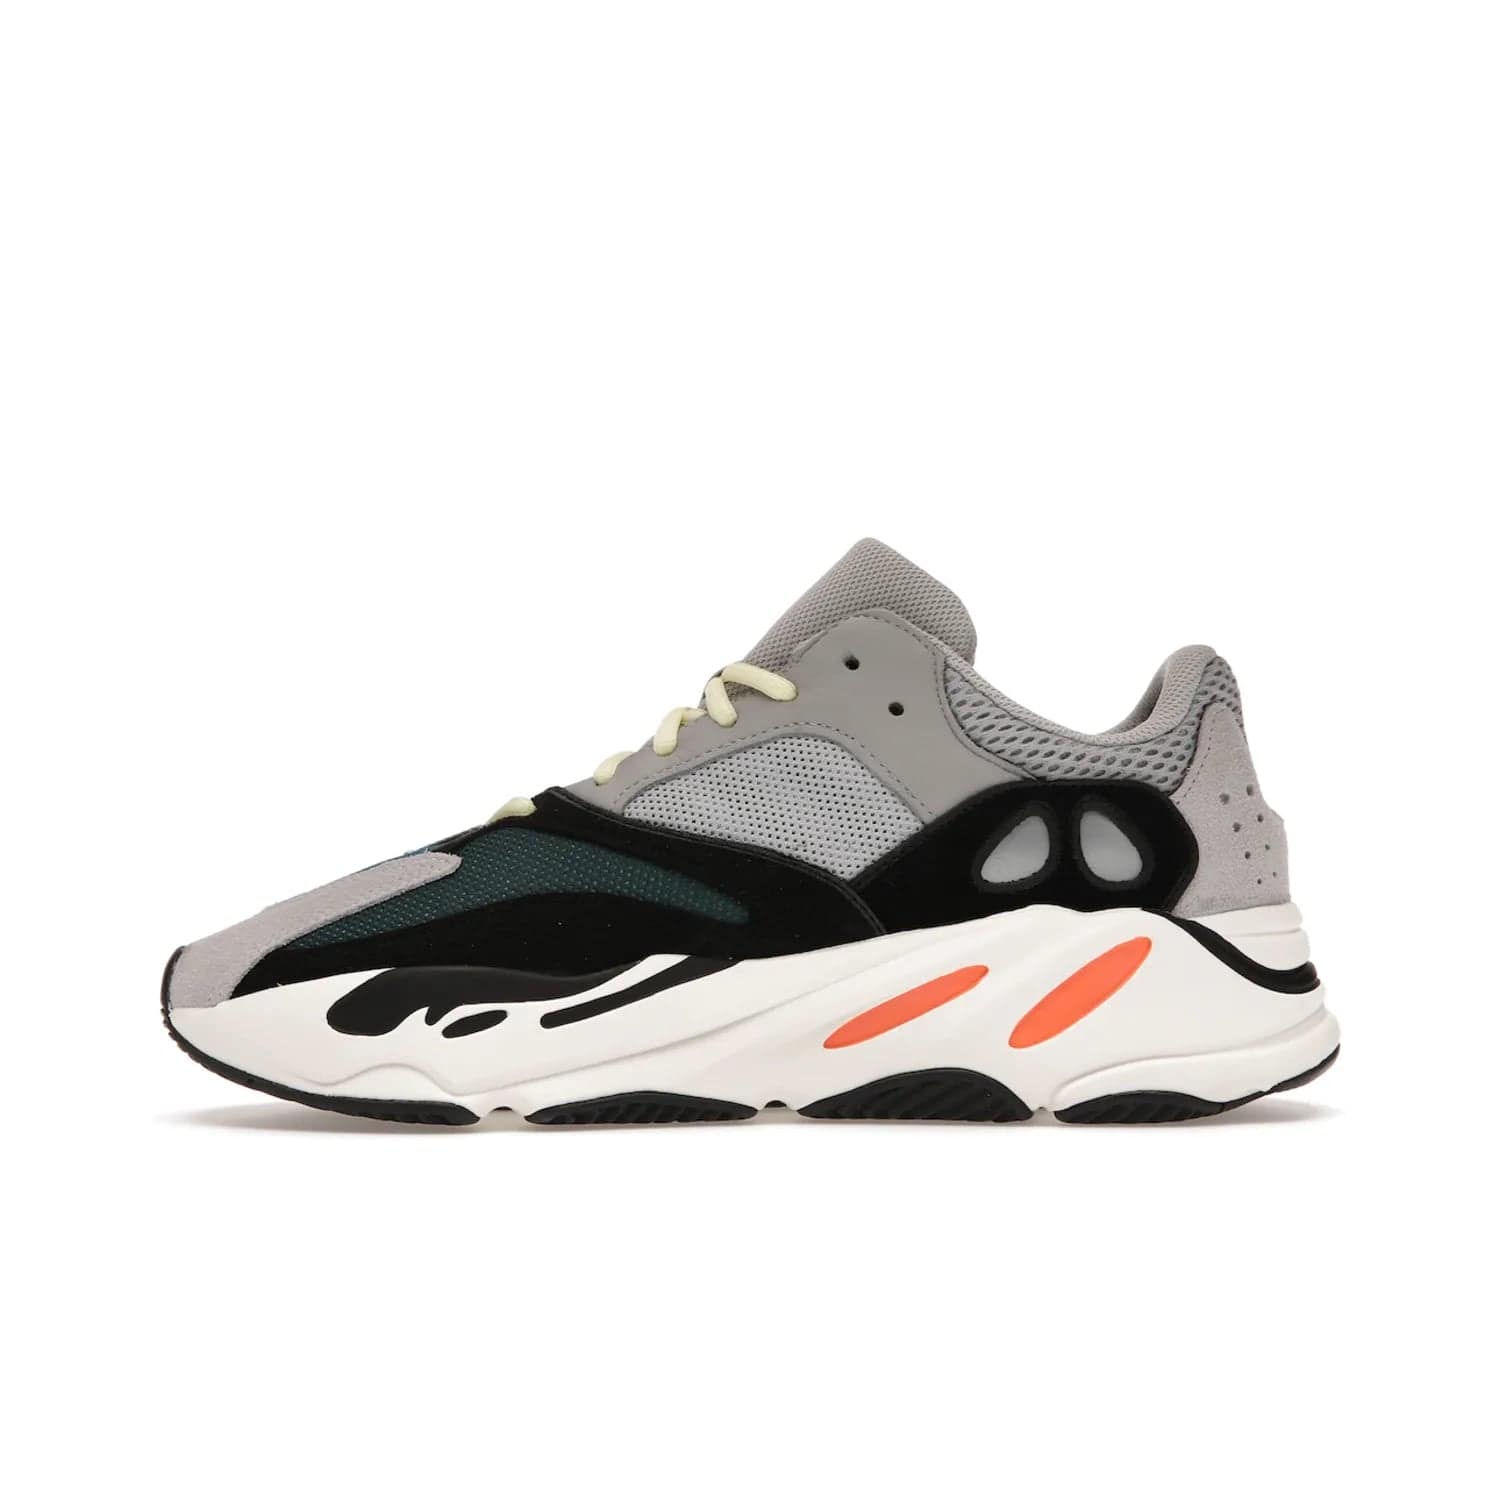 adidas Yeezy Boost 700 Wave Runner - Image 19 - Only at www.BallersClubKickz.com - Shop the iconic adidas Yeezy Boost 700 Wave Runner. Featuring grey mesh and leather upper, black suede overlays, teal mesh underlays, and signature Boost sole. Be bold & make a statement.